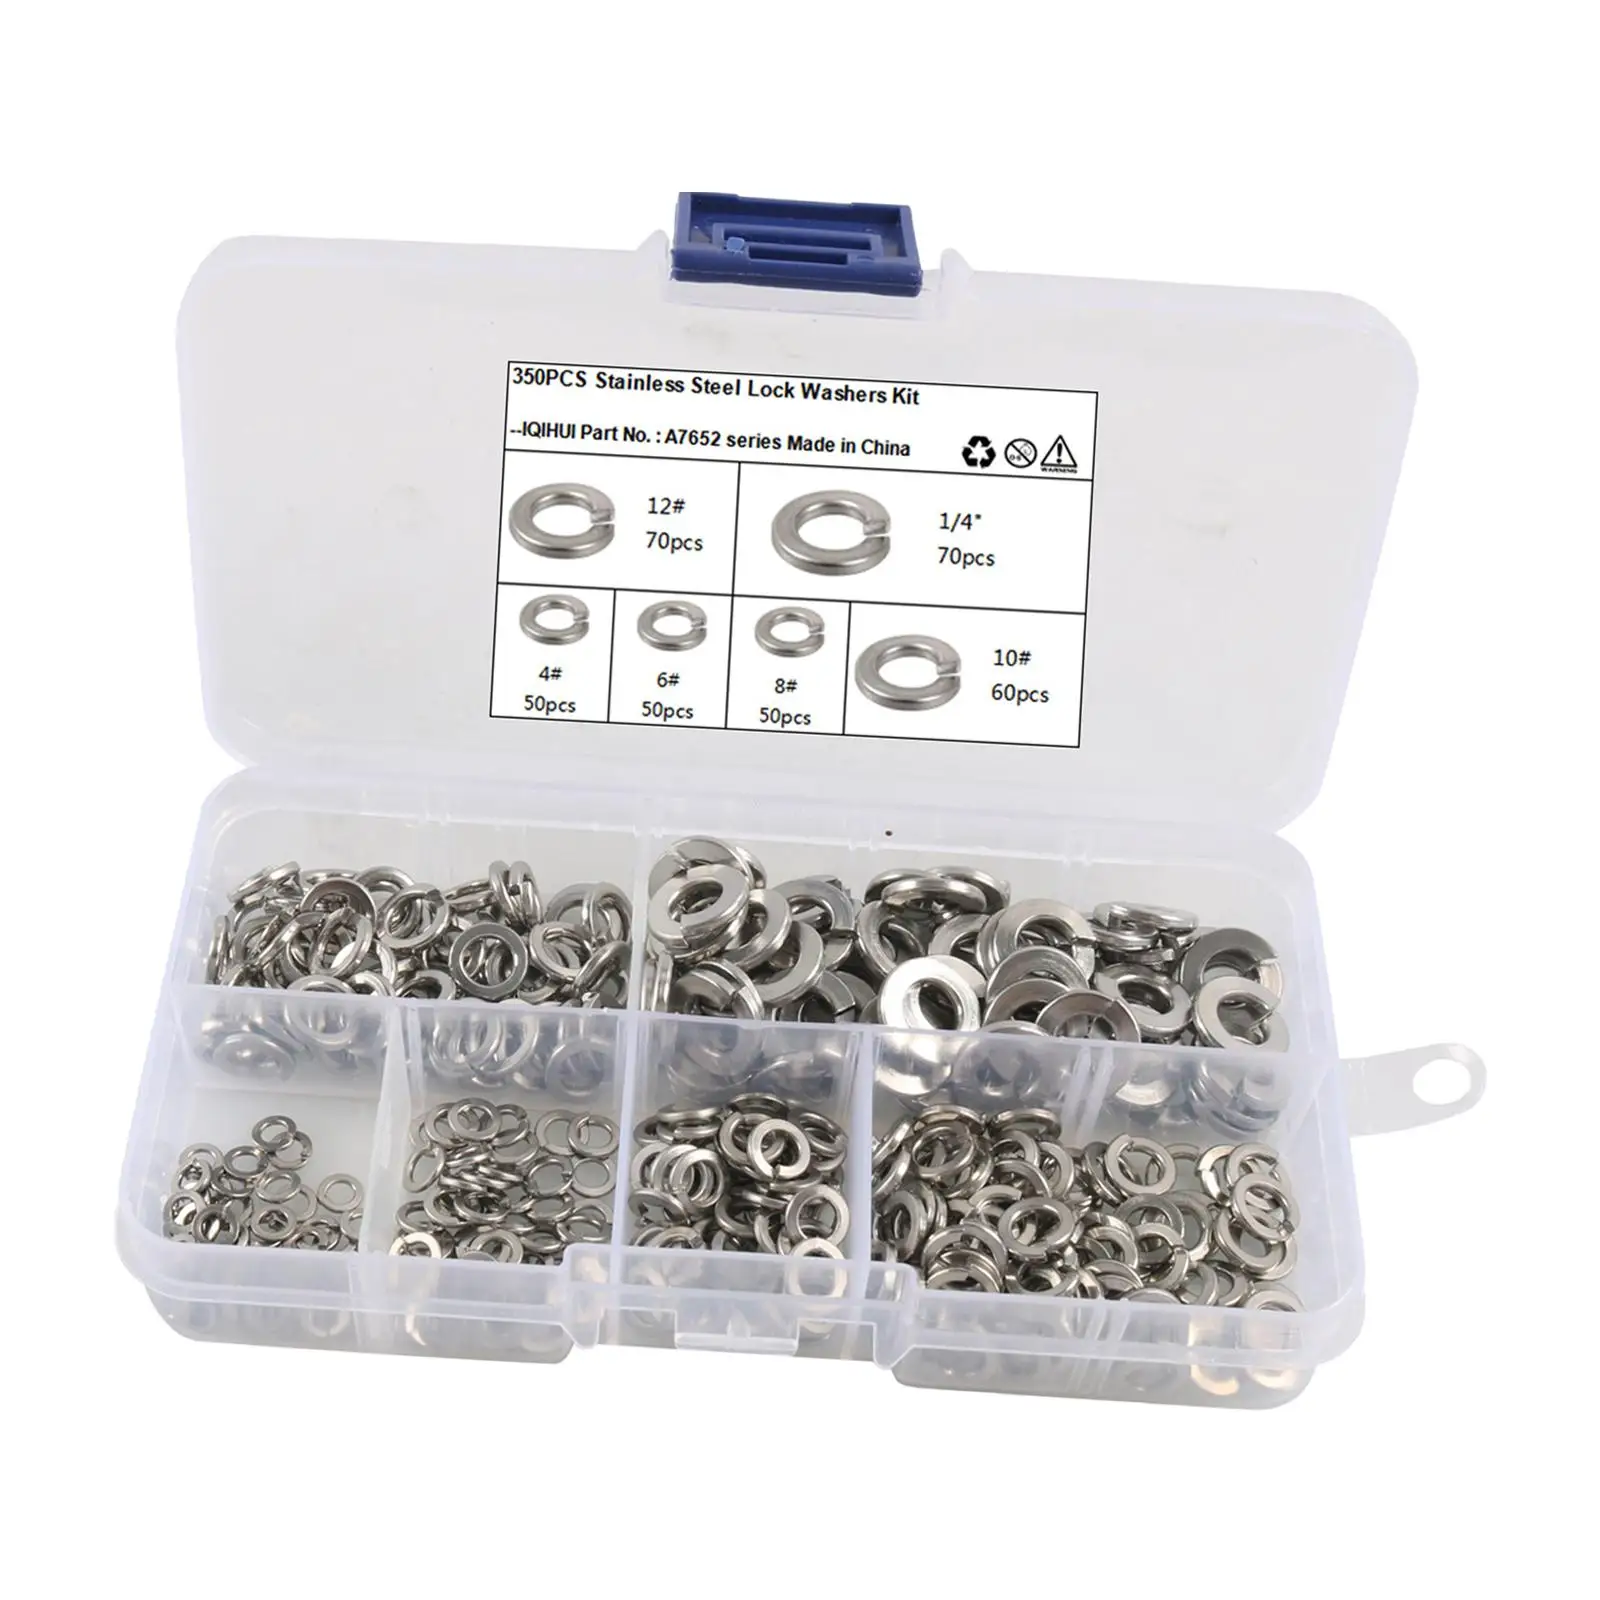 lock Washers Gasket with Clear Box for Hardware Home Decoration Electrical Maintenance